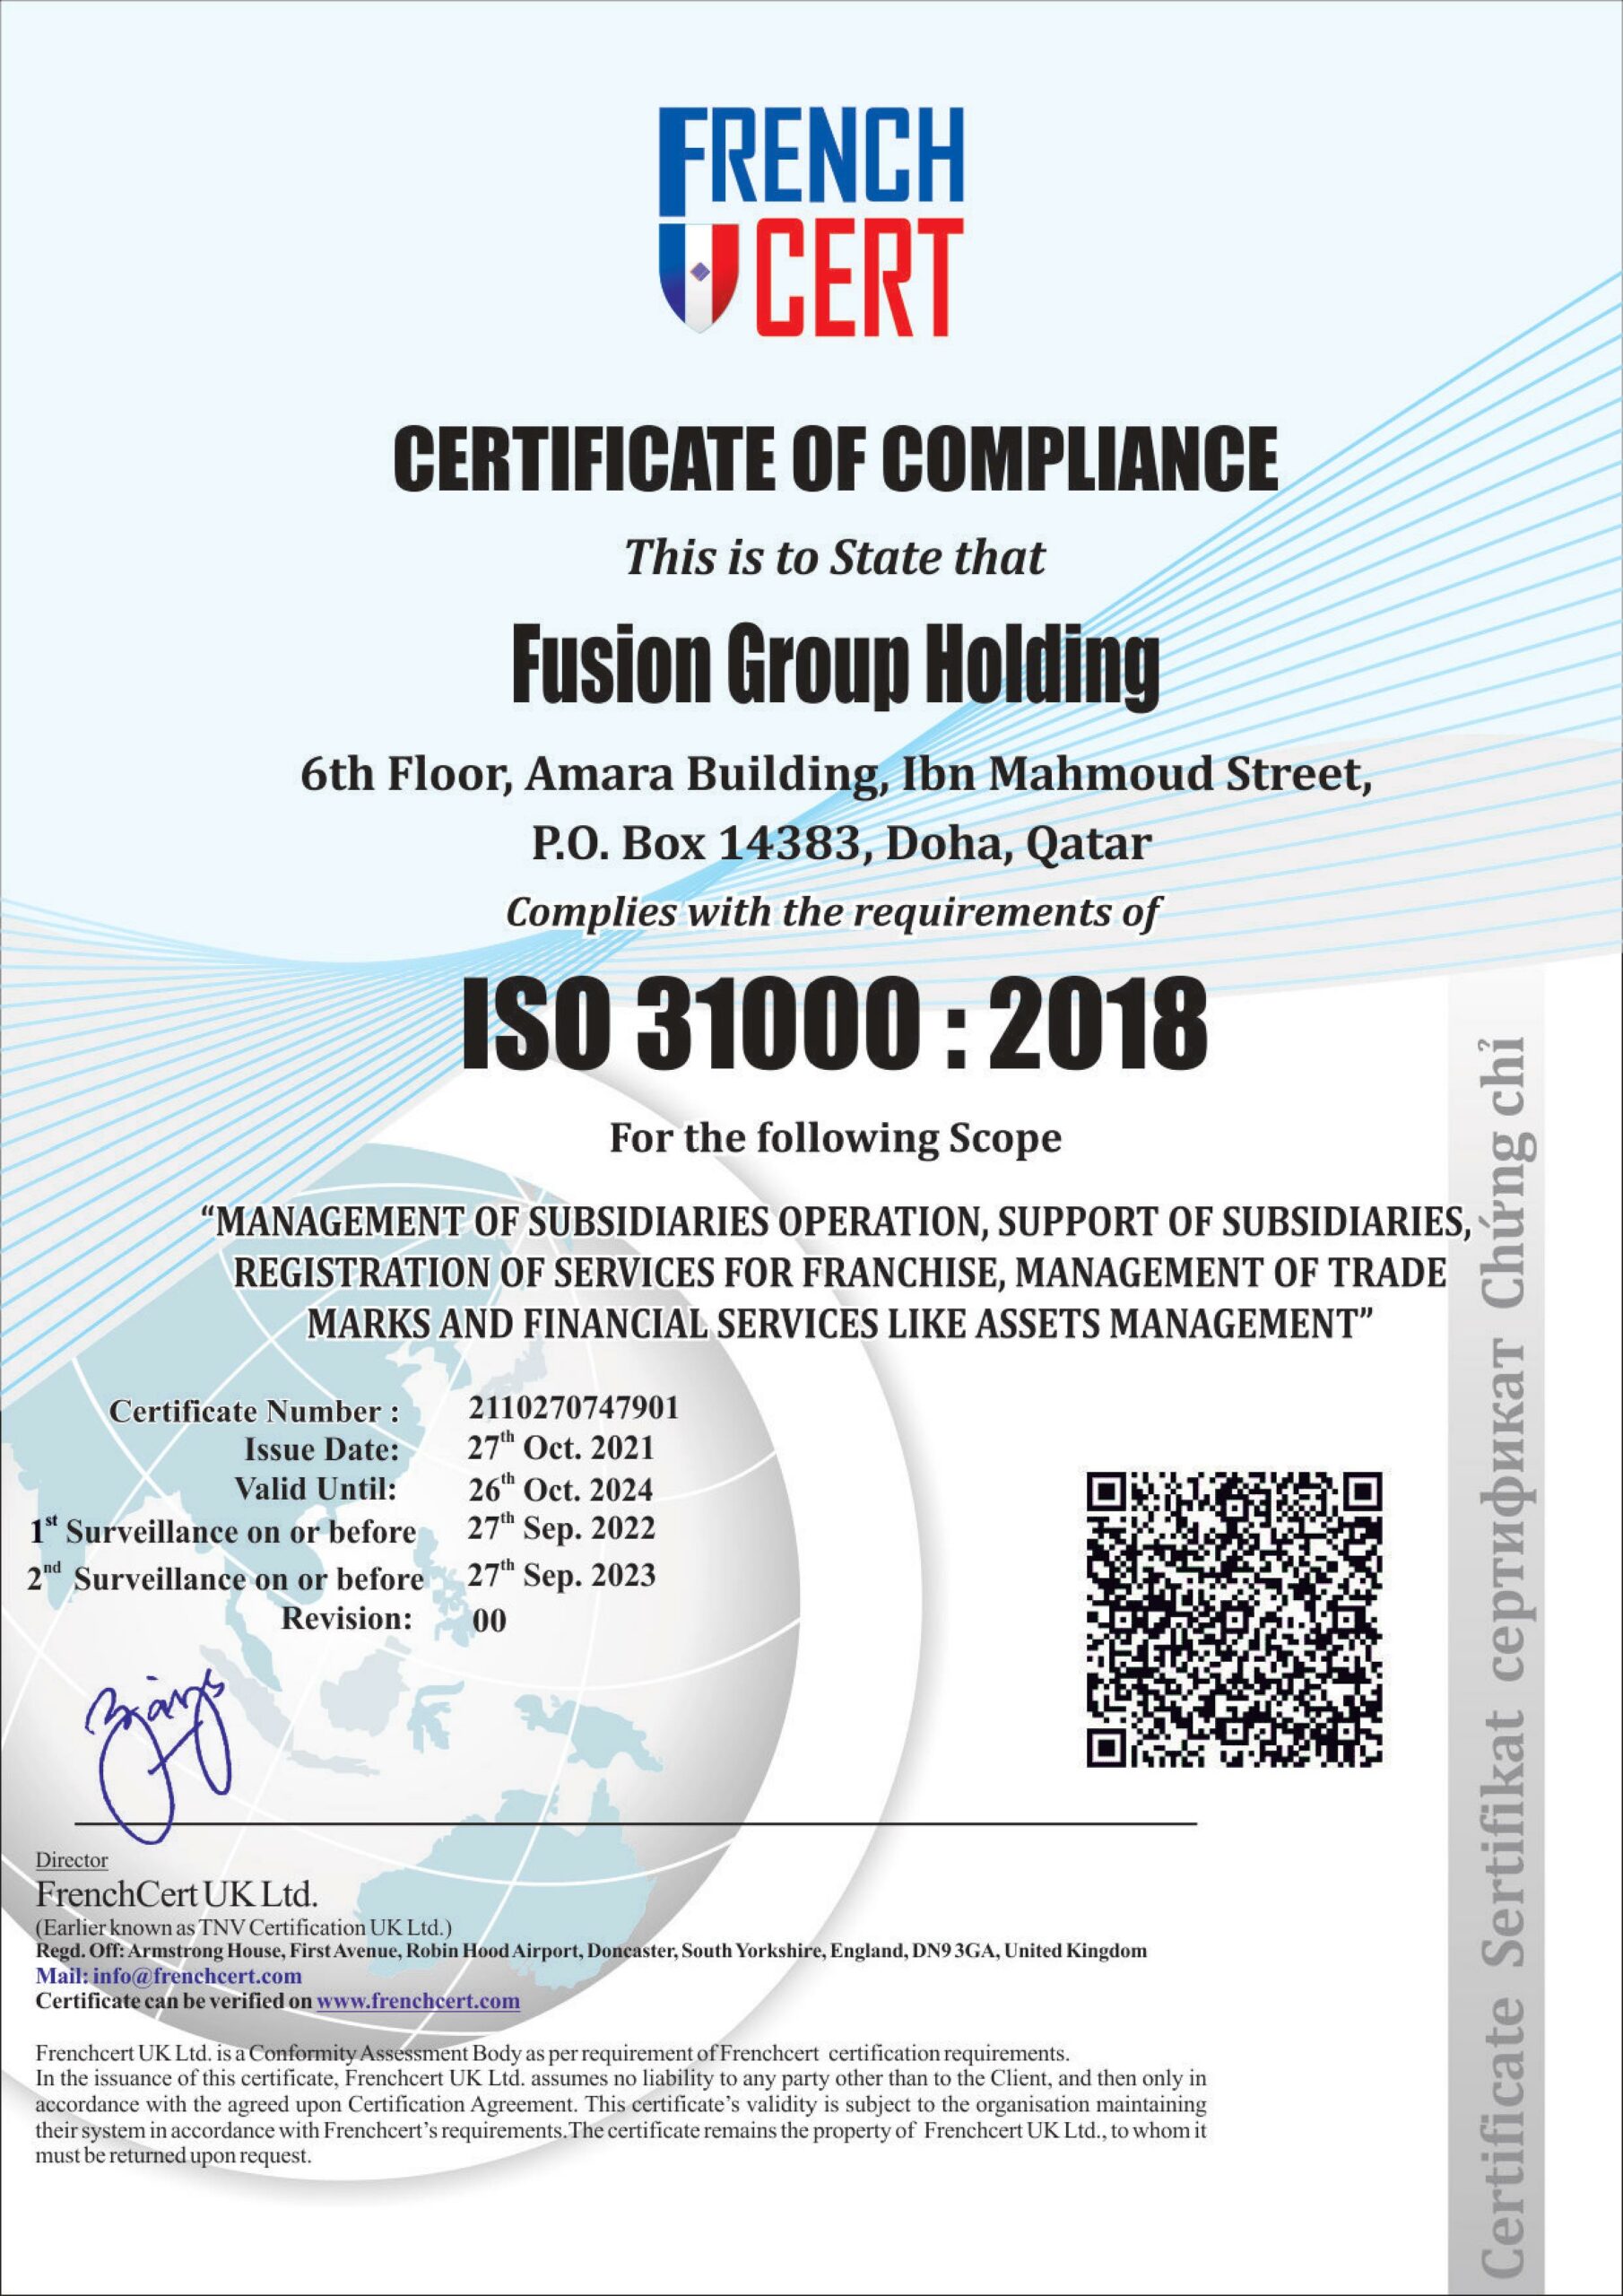 ISO 37001:2016 Anti Bribery Management Systems